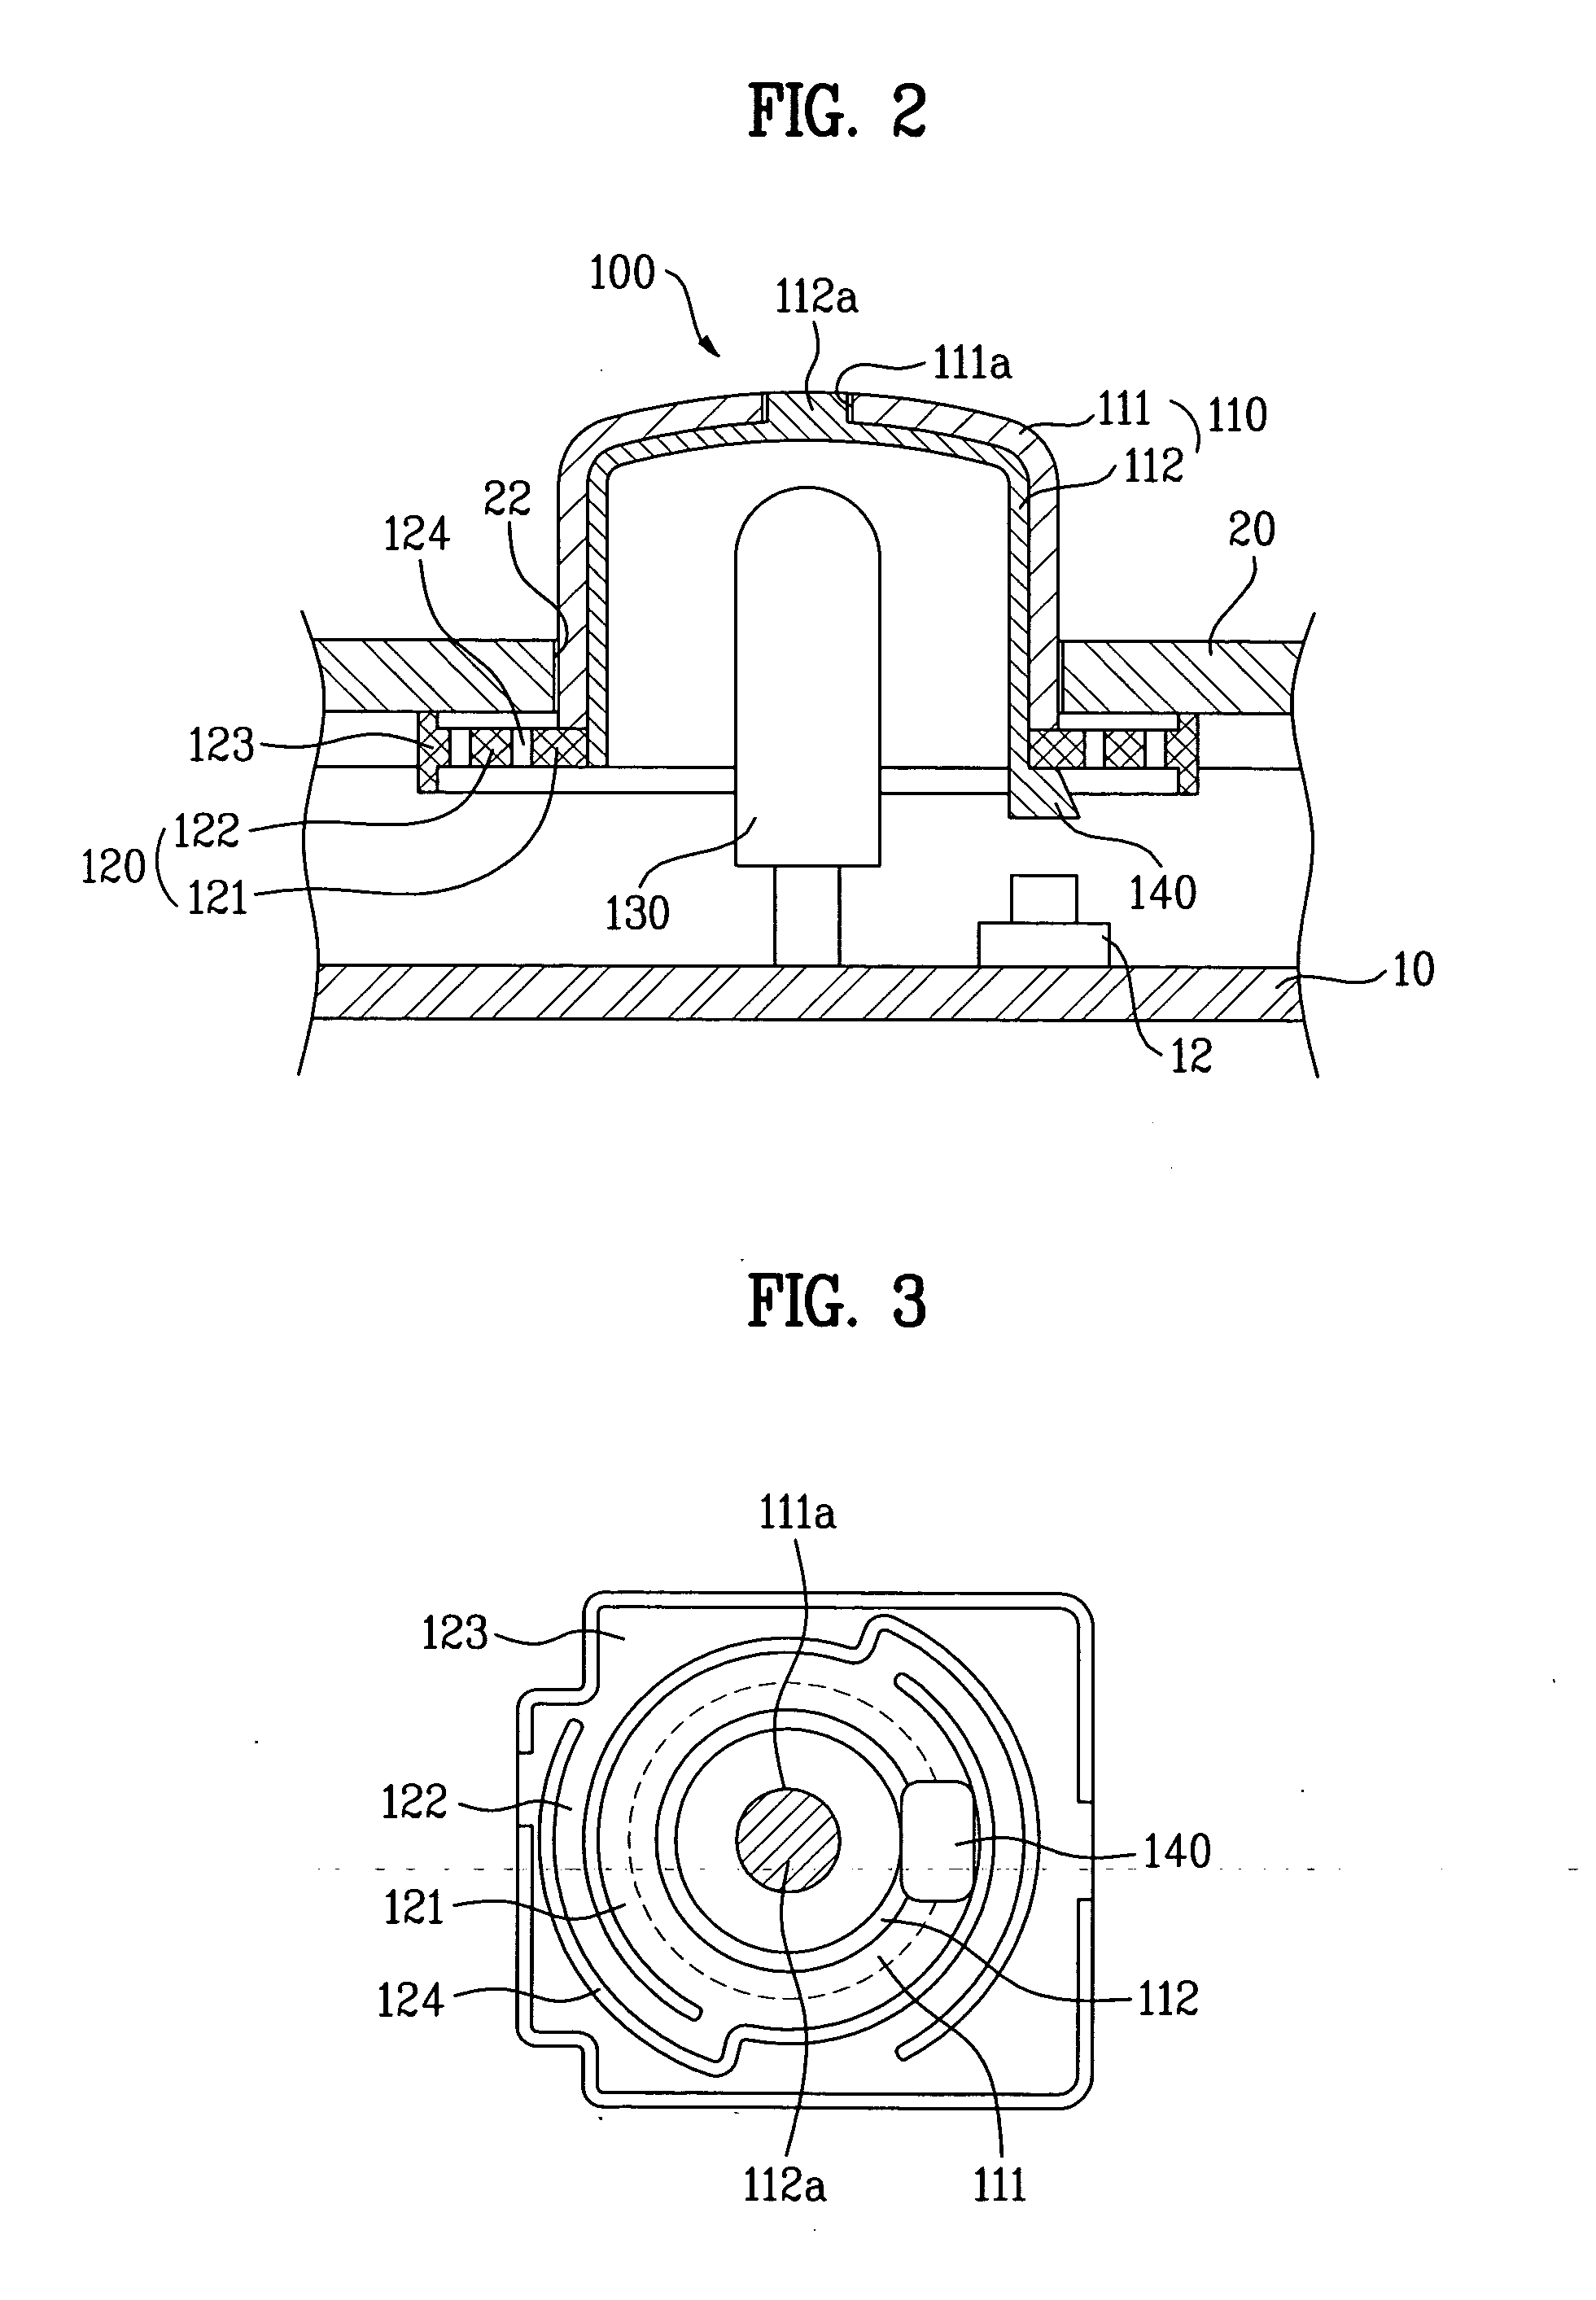 Button assembly for home appliance